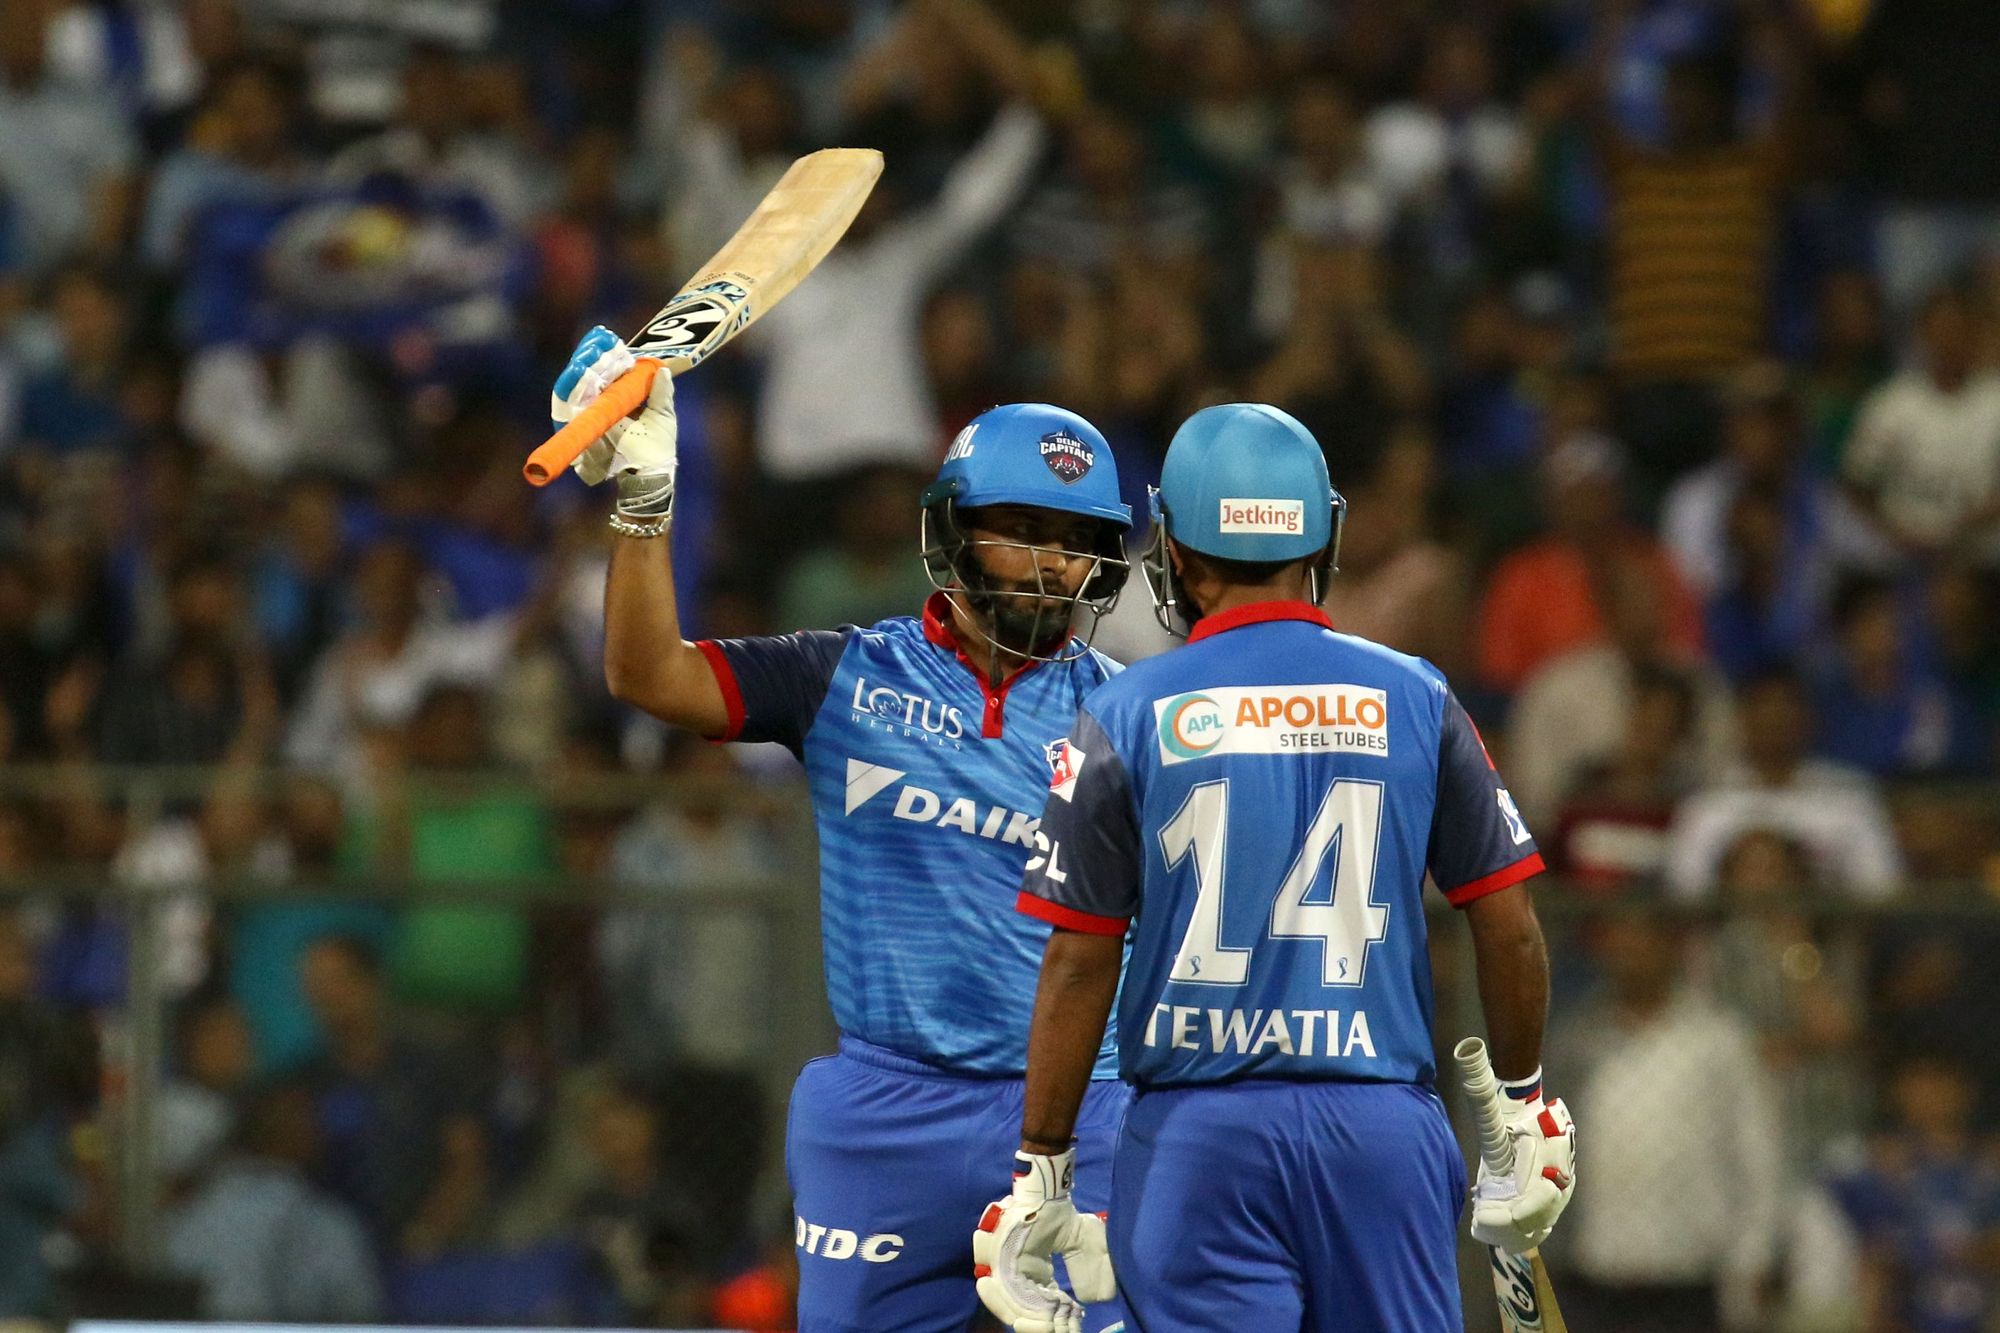 Twitter reacts after witnessing Delhi Capitals' terrible outing with the bat